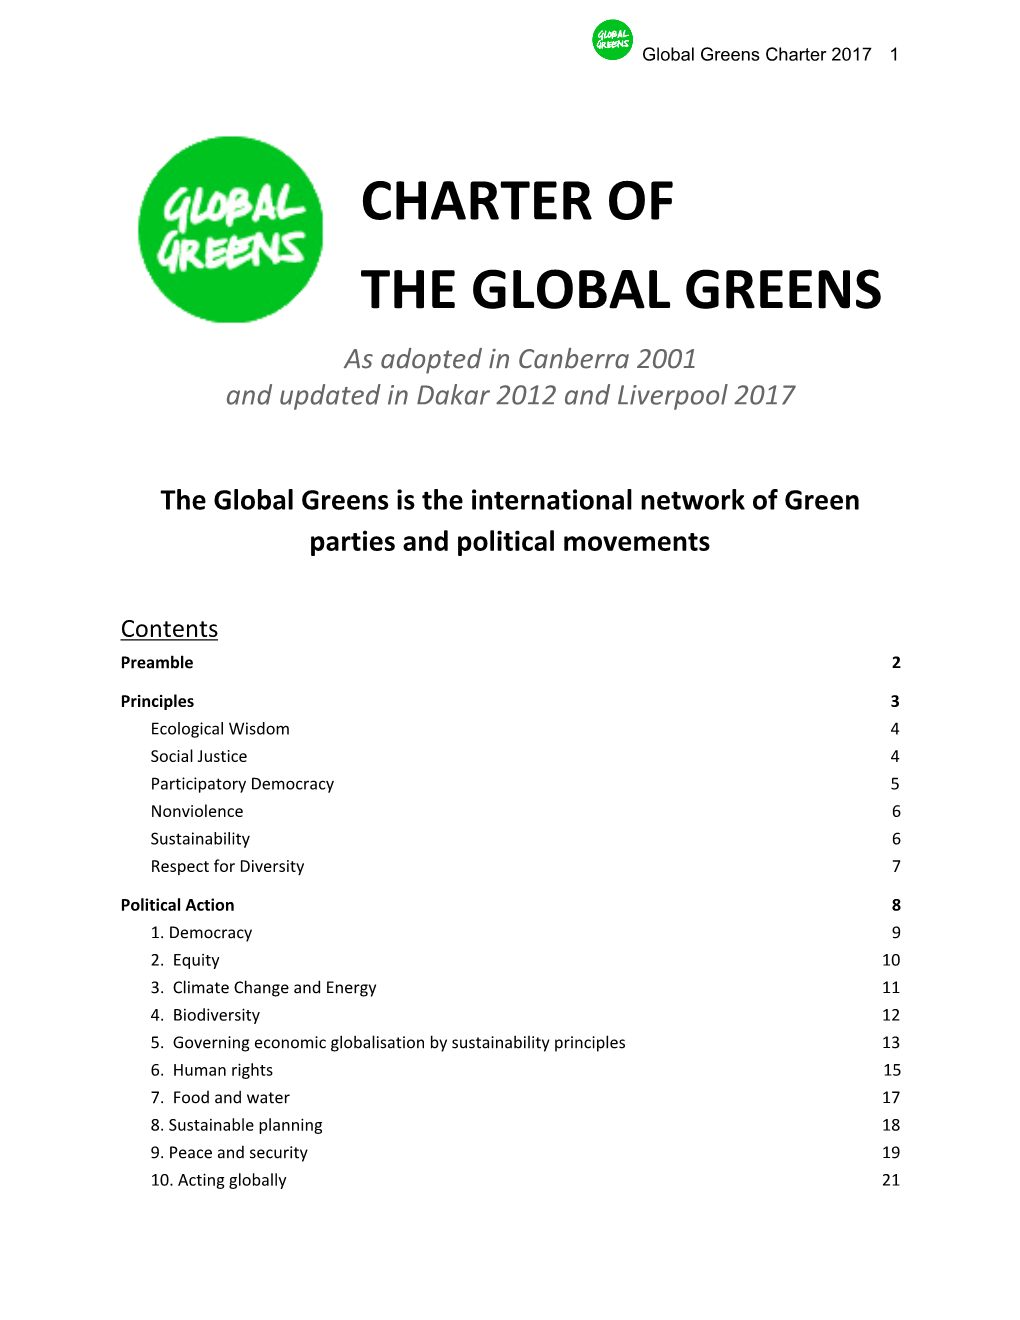 CHARTER of the GLOBAL GREENS As Adopted in Canberra 2001 and Updated in Dakar 2012 and Liverpool 2017